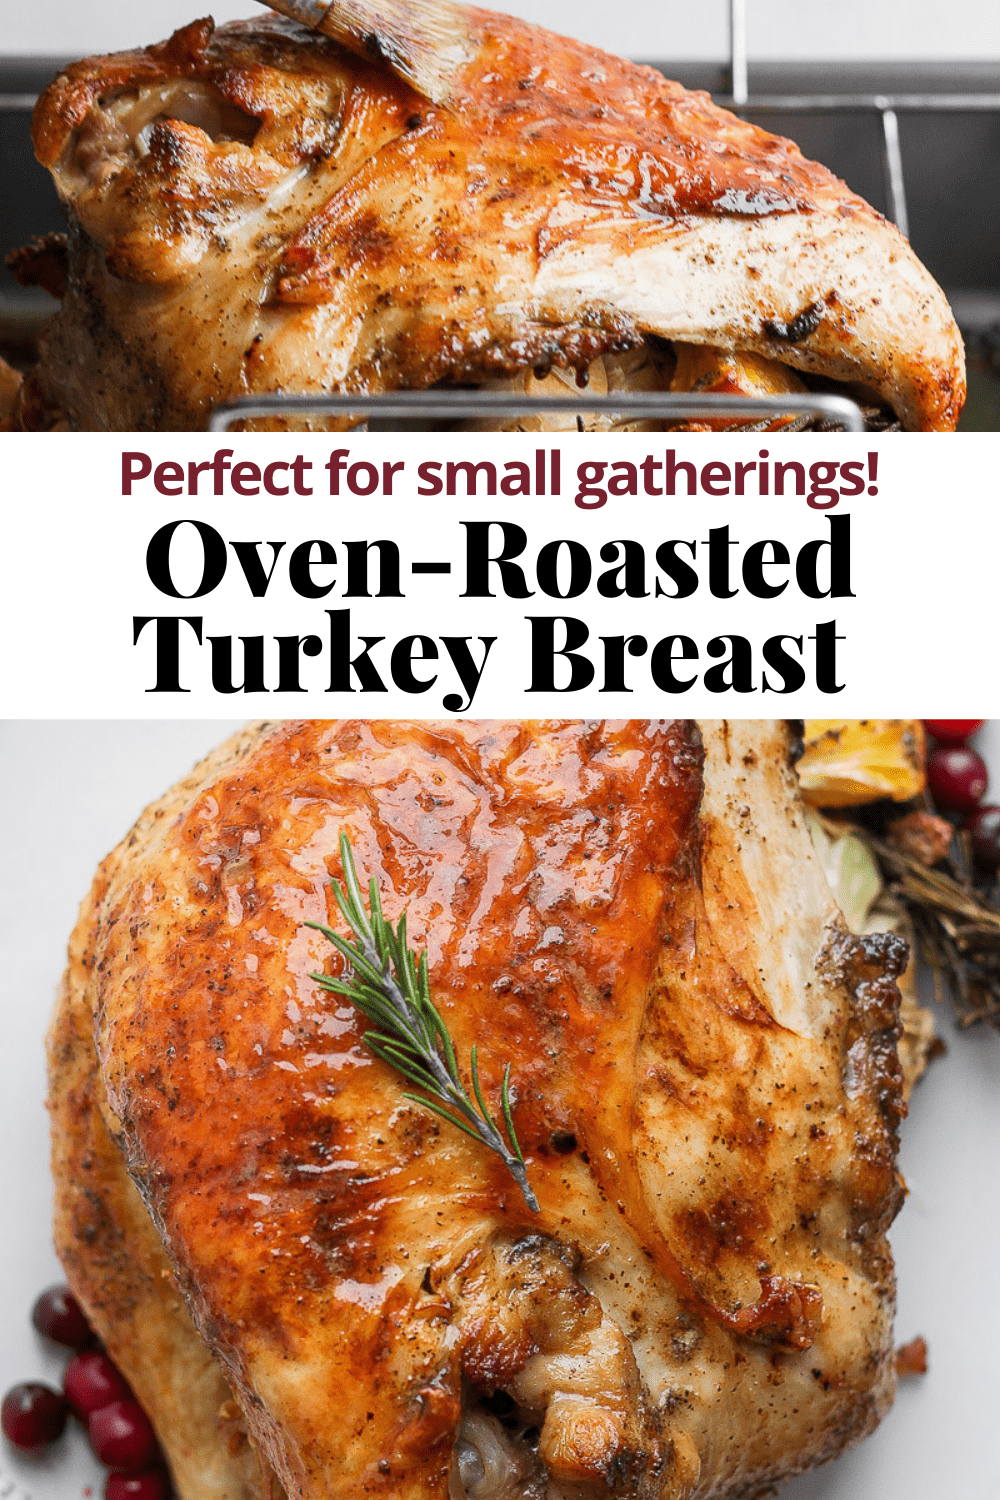 Pinterest image for oven-roasted turkey breast.